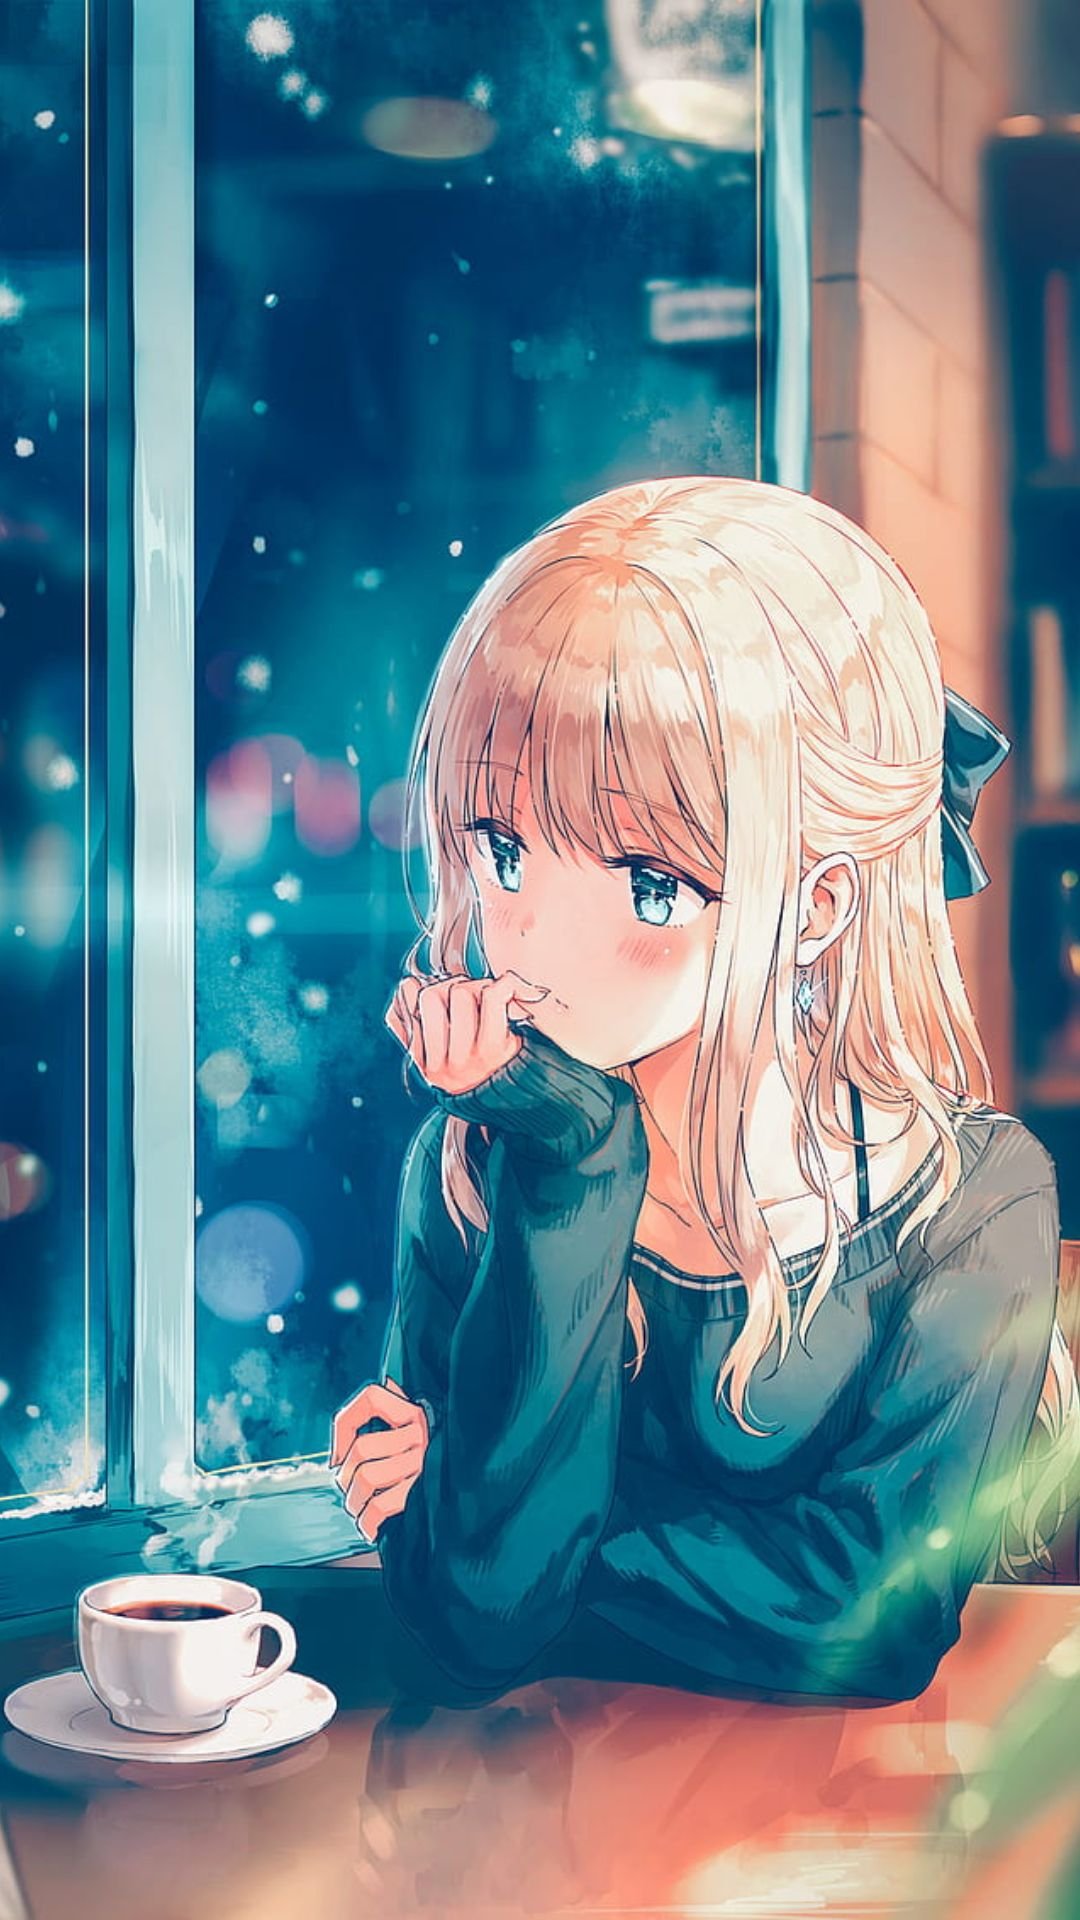 130+ Cute Anime Girls Images: Perfect For Profile Pics